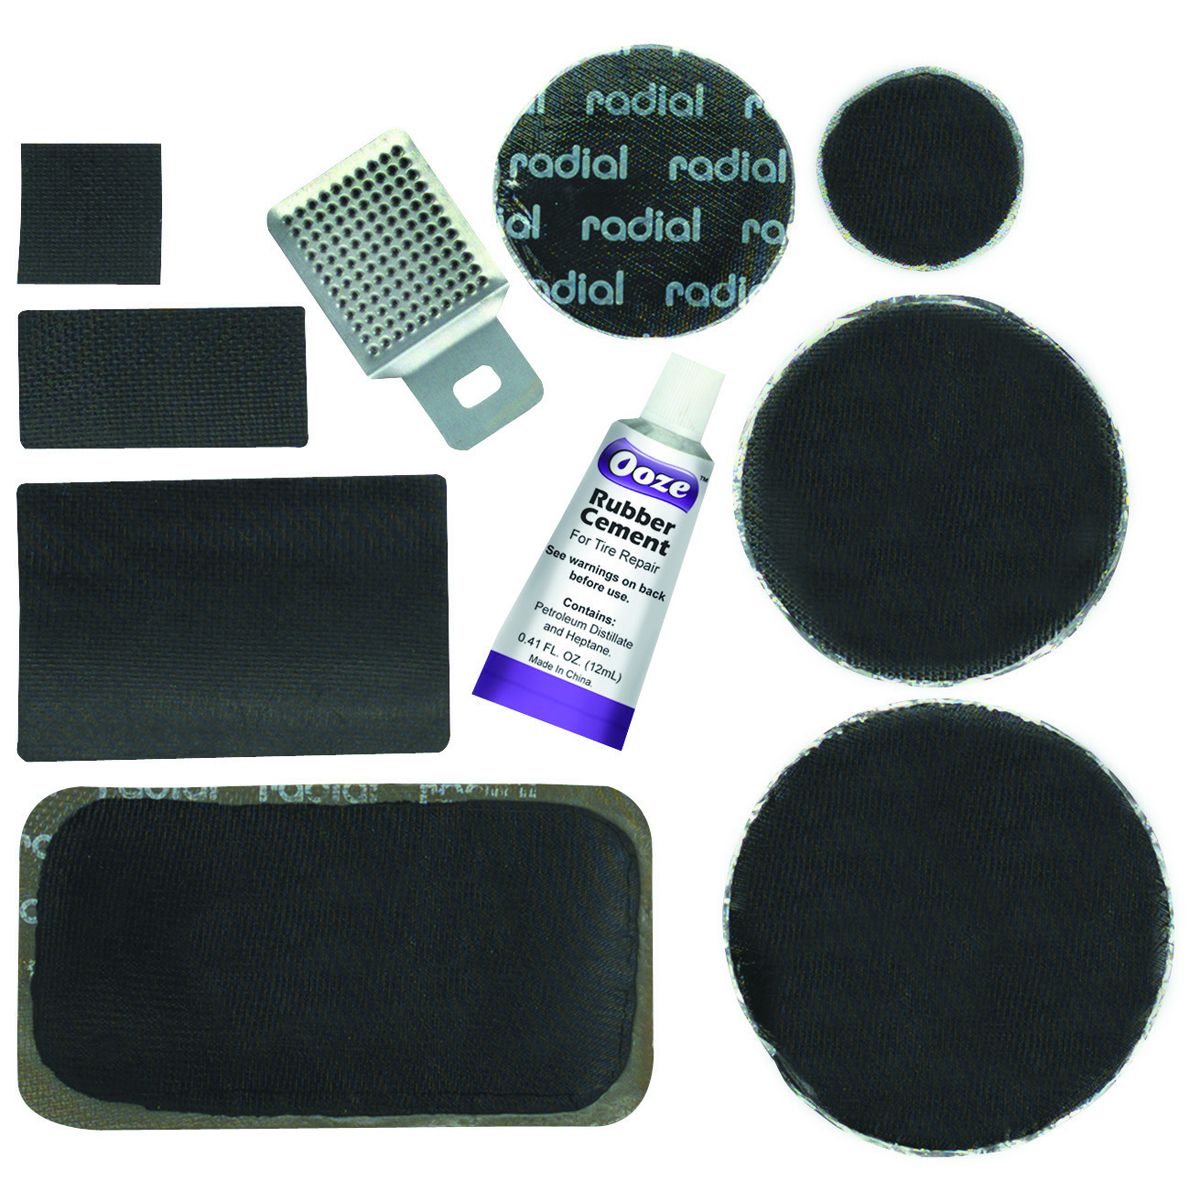 Tire Patch Kit 60 Pc - $2.97 (clearance) at Harbor Freight